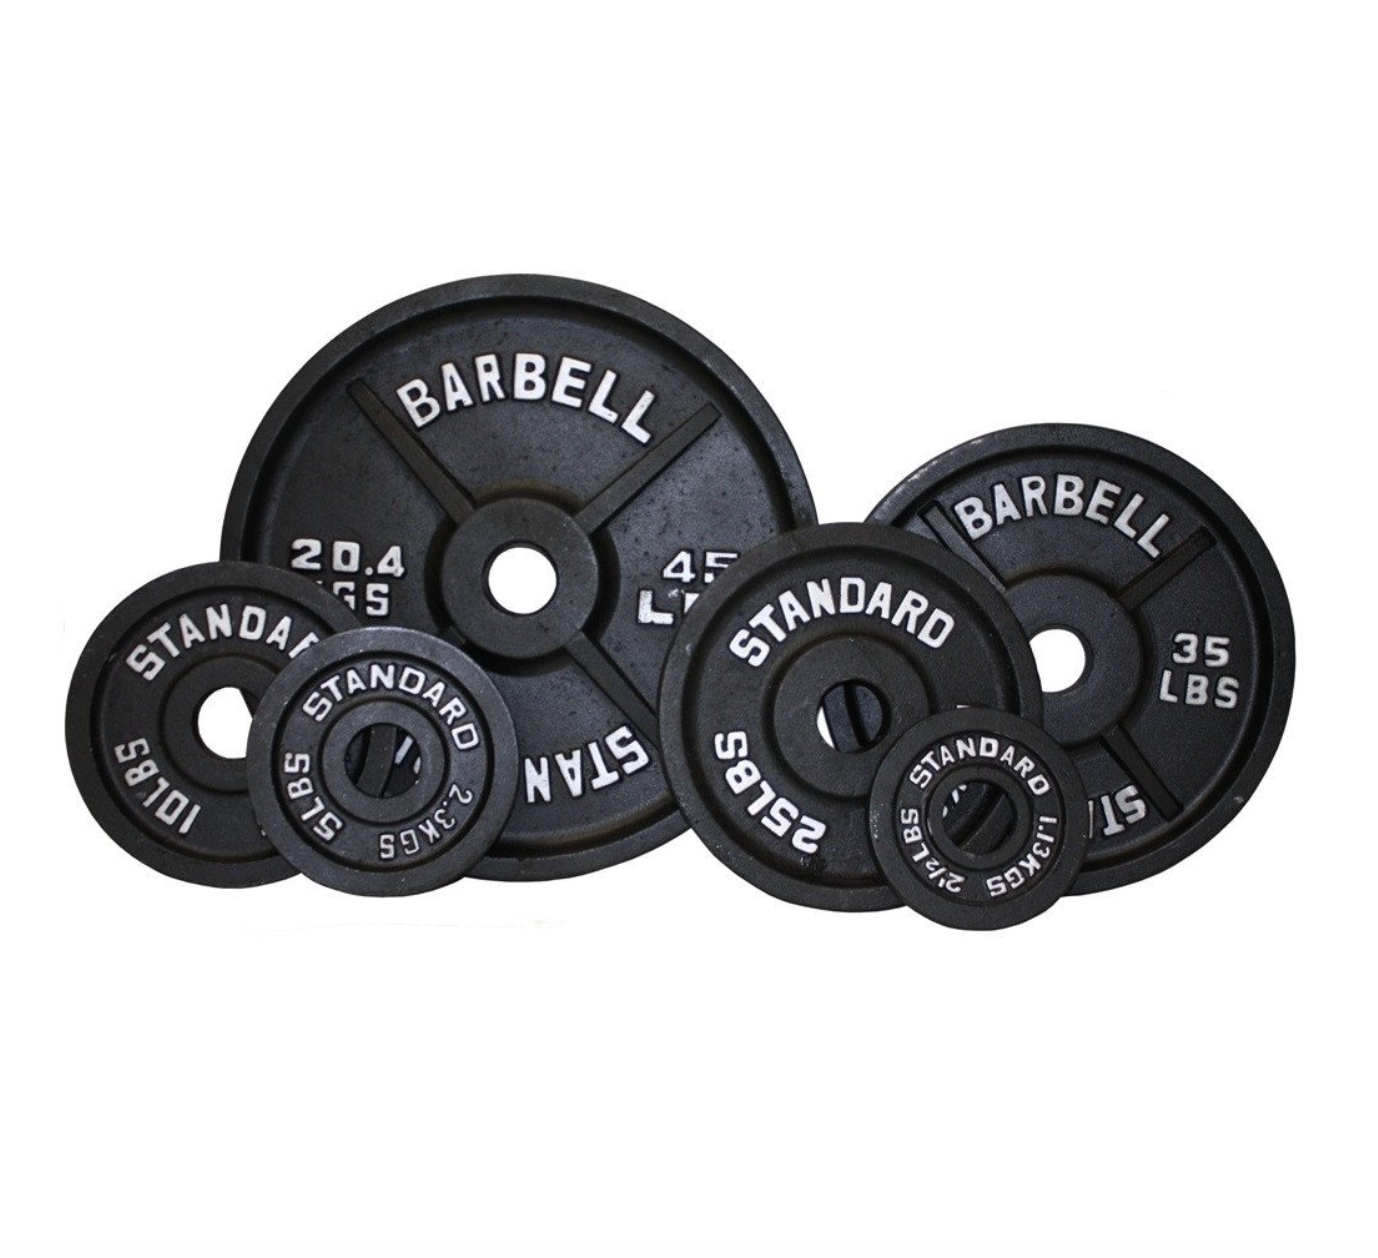 New Olympic Weights Plate Sets (255 lbs, 355 lbs or 455 lbs)